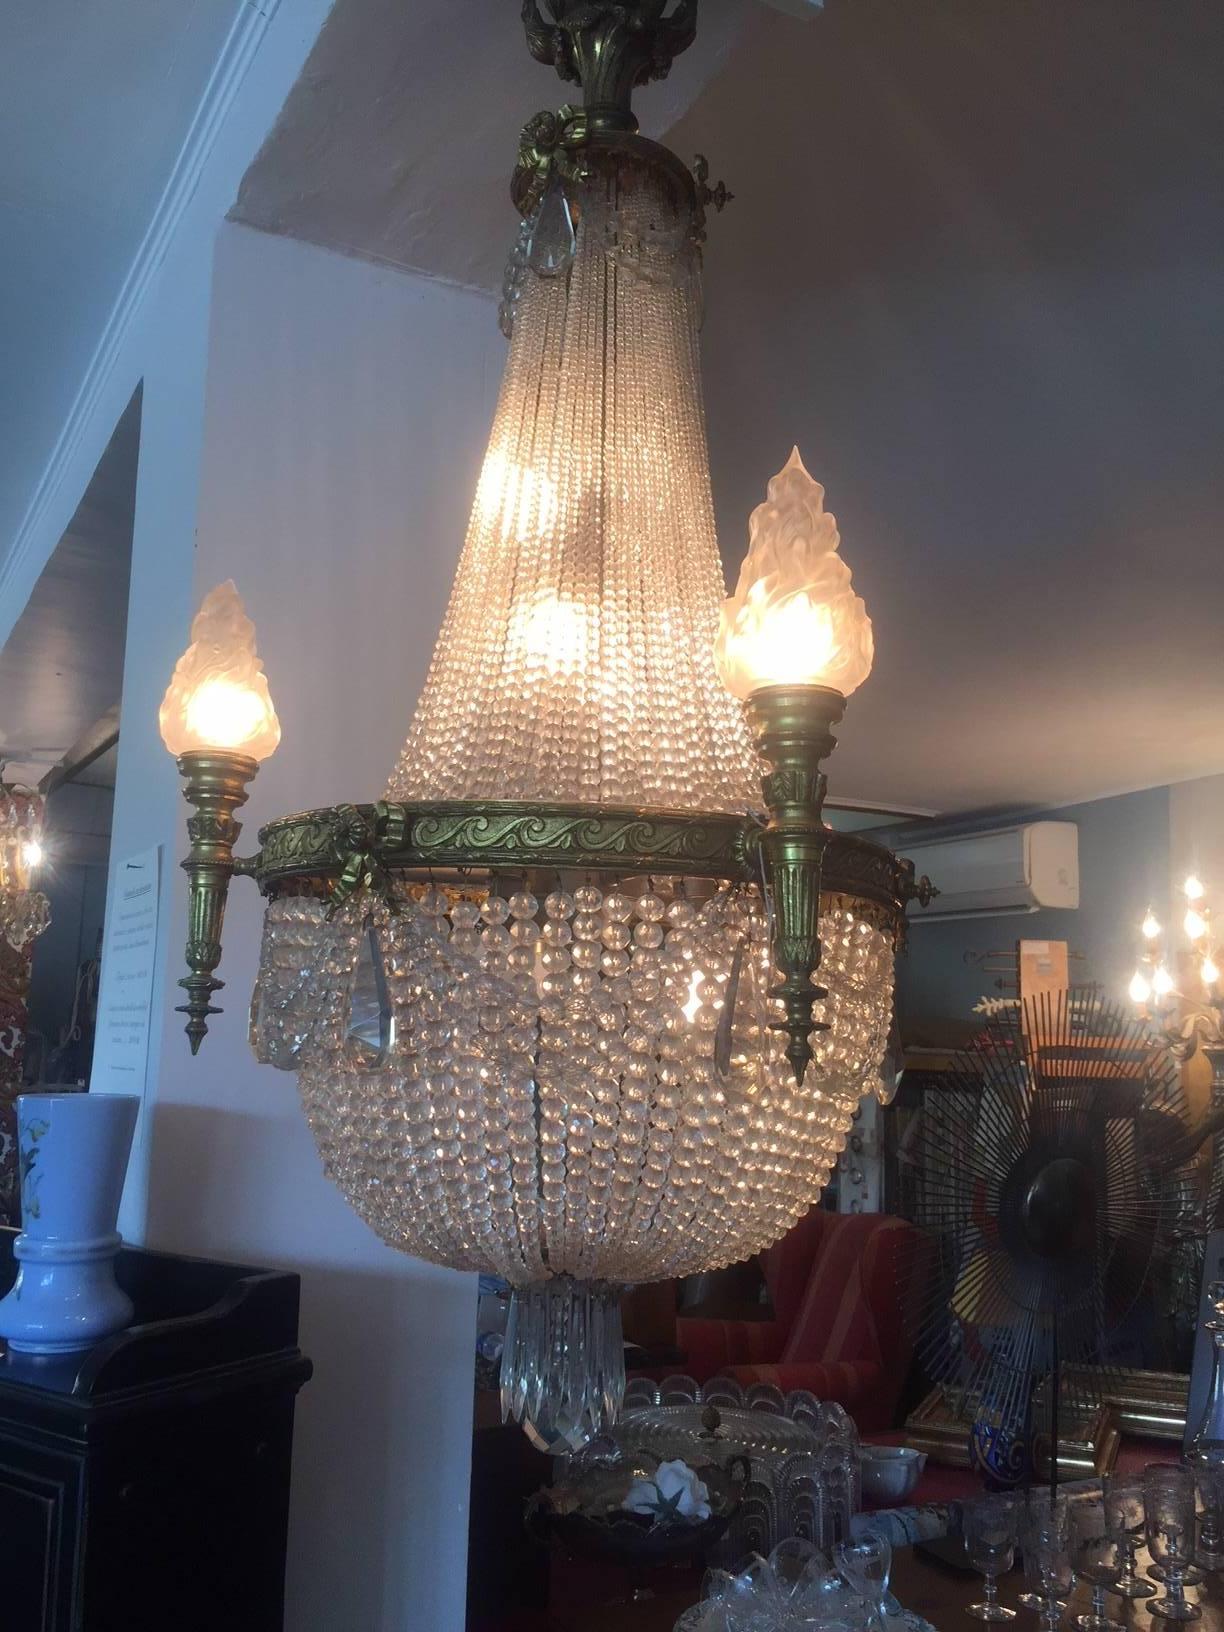 20th century bronze balloon chandelier with crystal and glass pendants.
There are four glasses torchlights. The structure chandelier is made with nice bronze sculpted elements. This is a very elegant chandelier which could be ideal in a living room